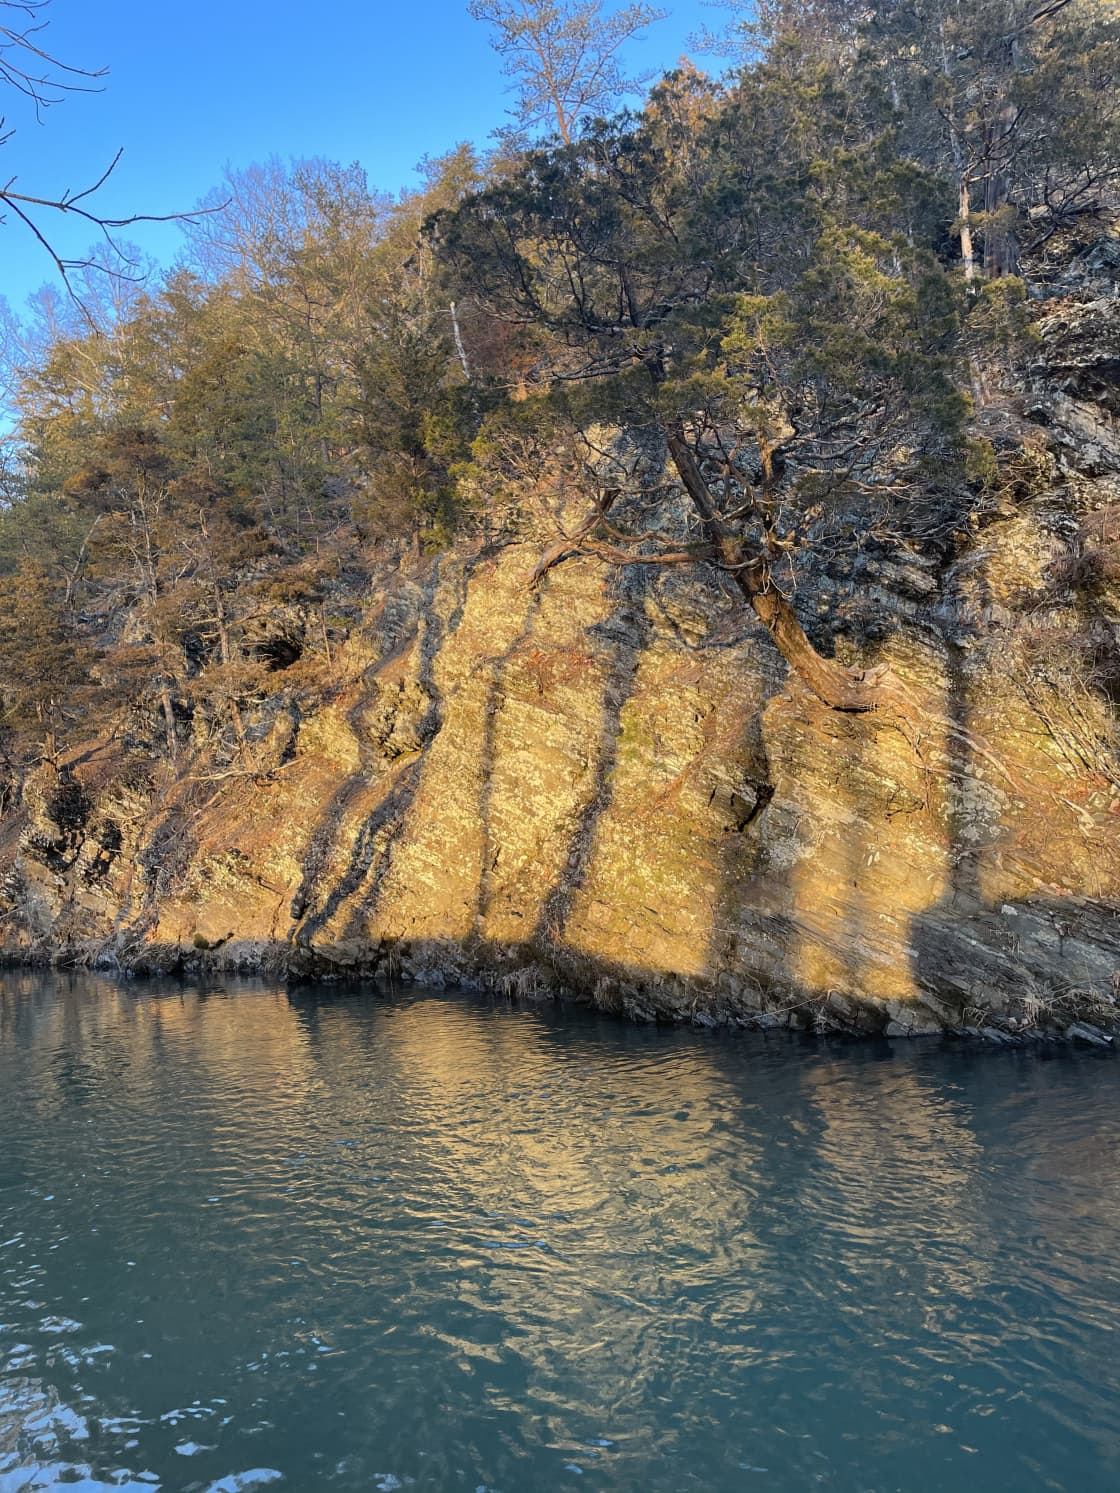 The Bluffs paint a new picture every day